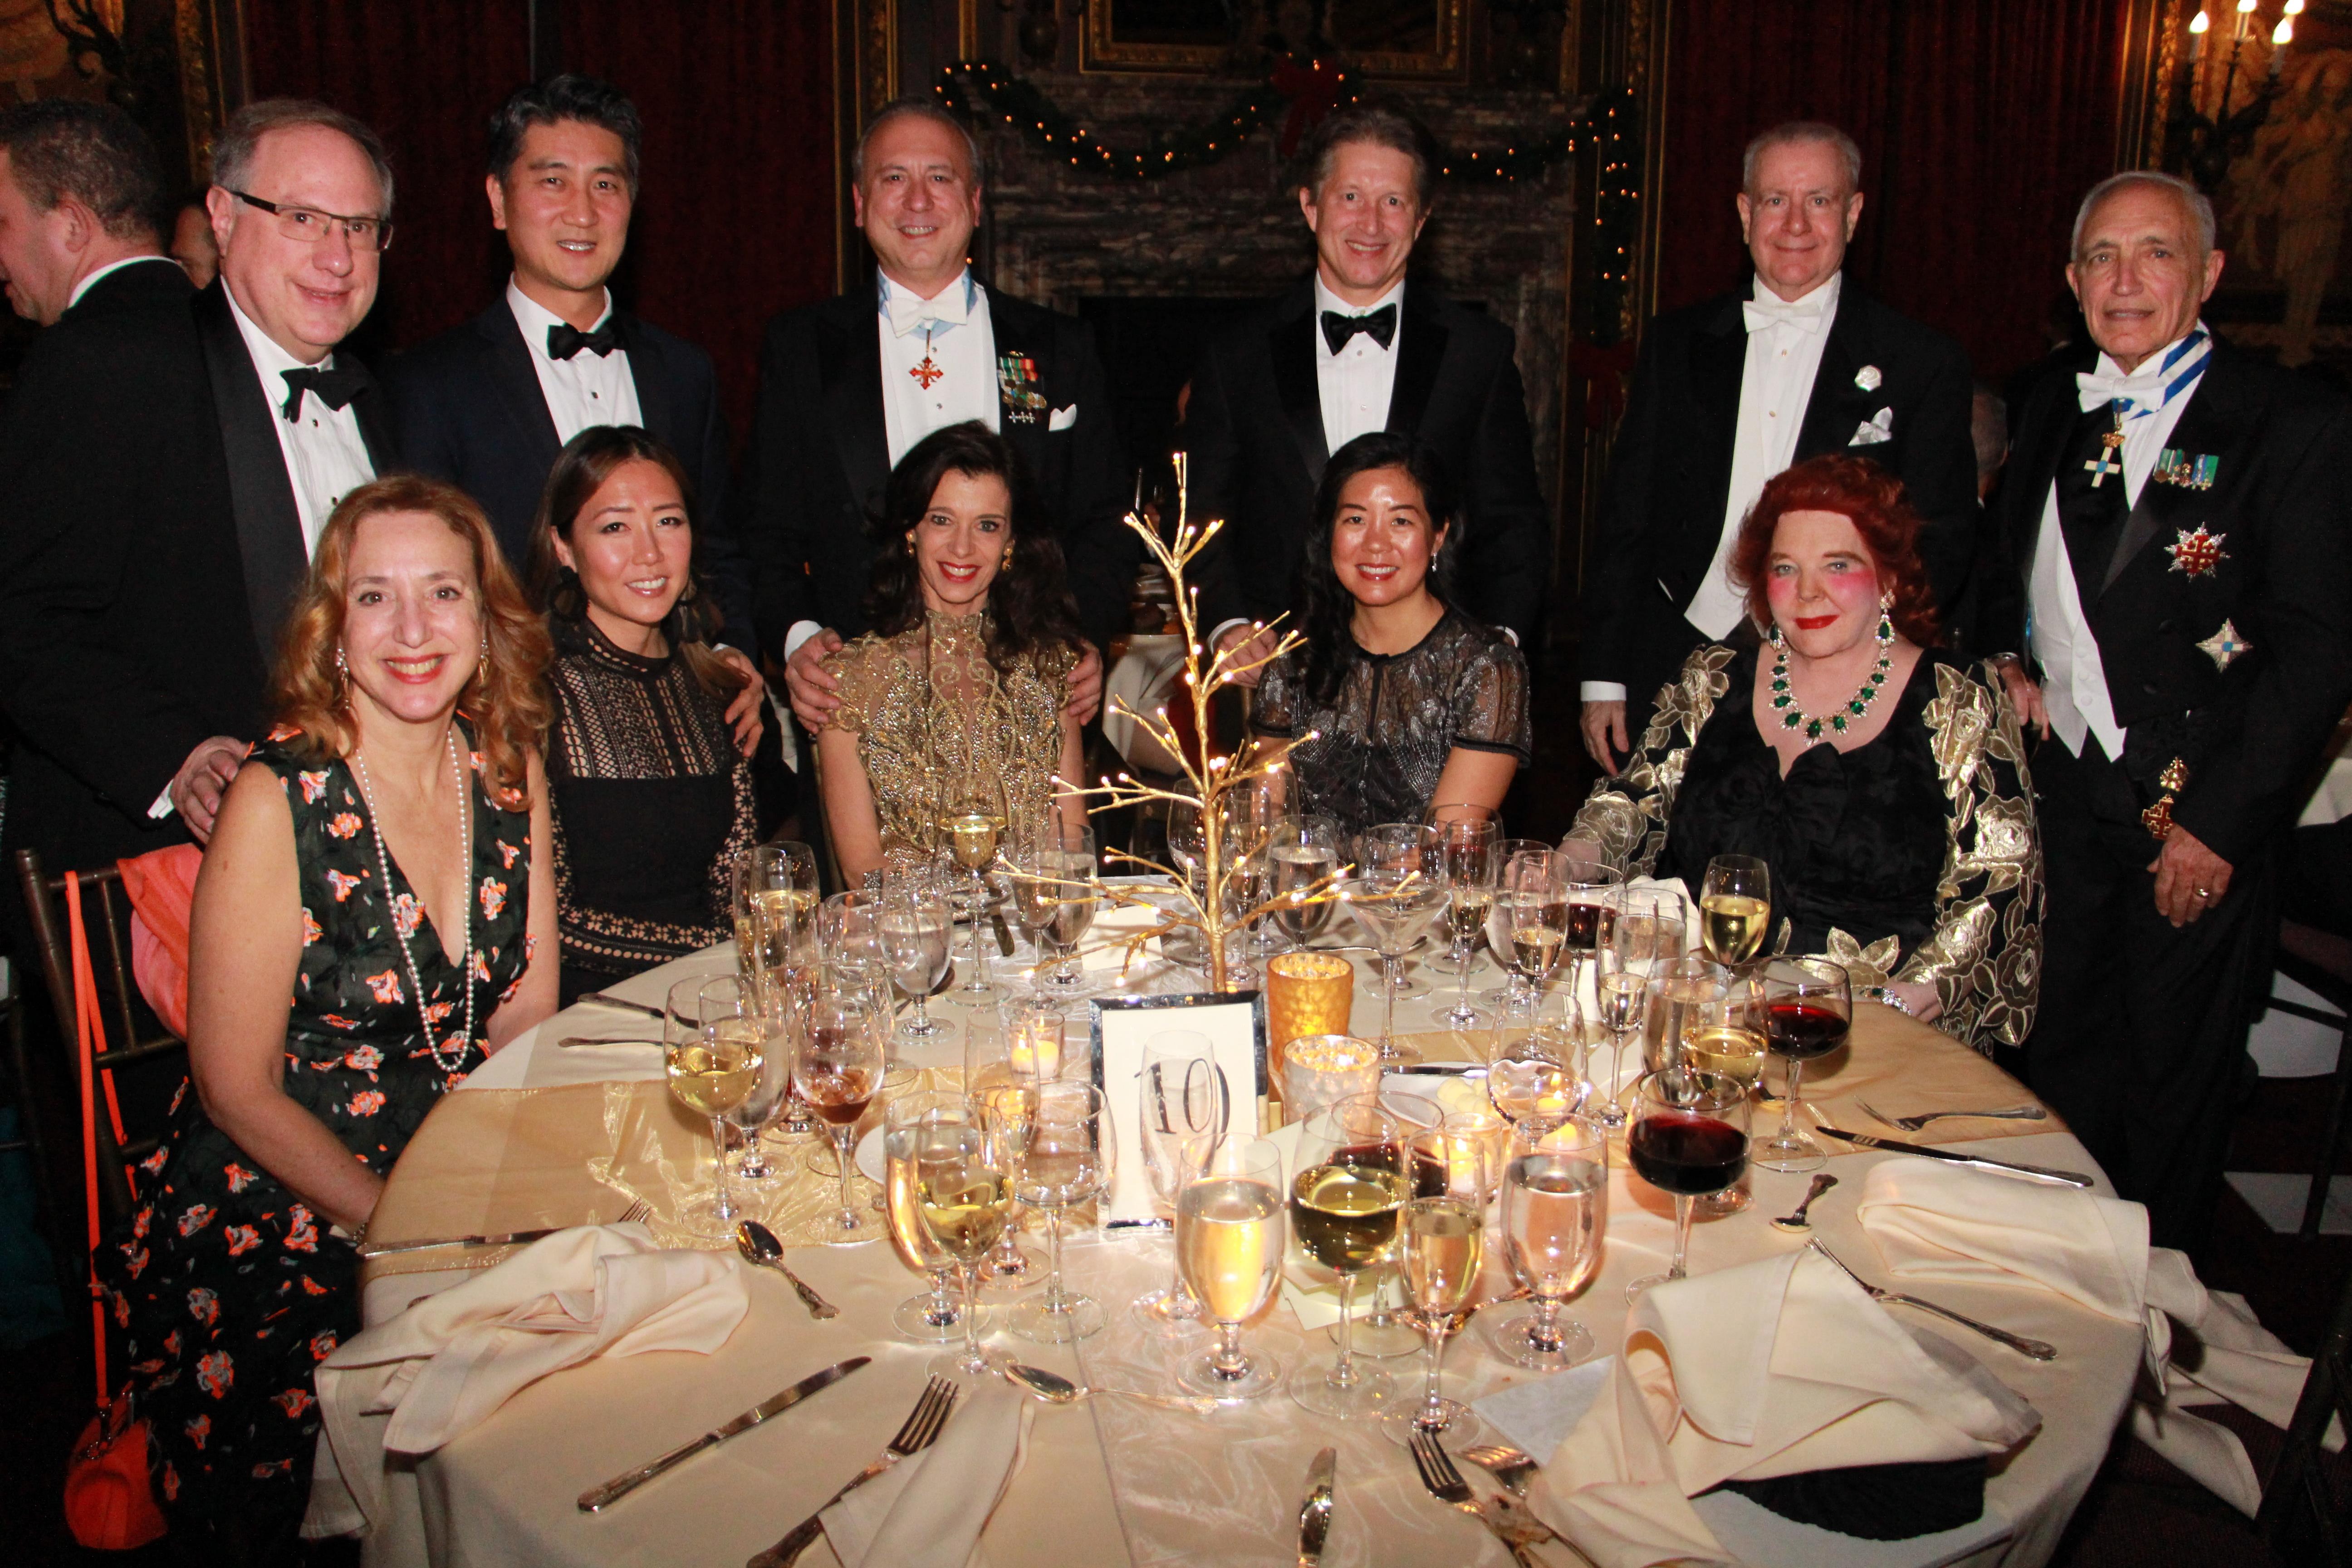 Savoy Ball Benefactor Table of Mr. and Mrs. Anthony Viscogliosi